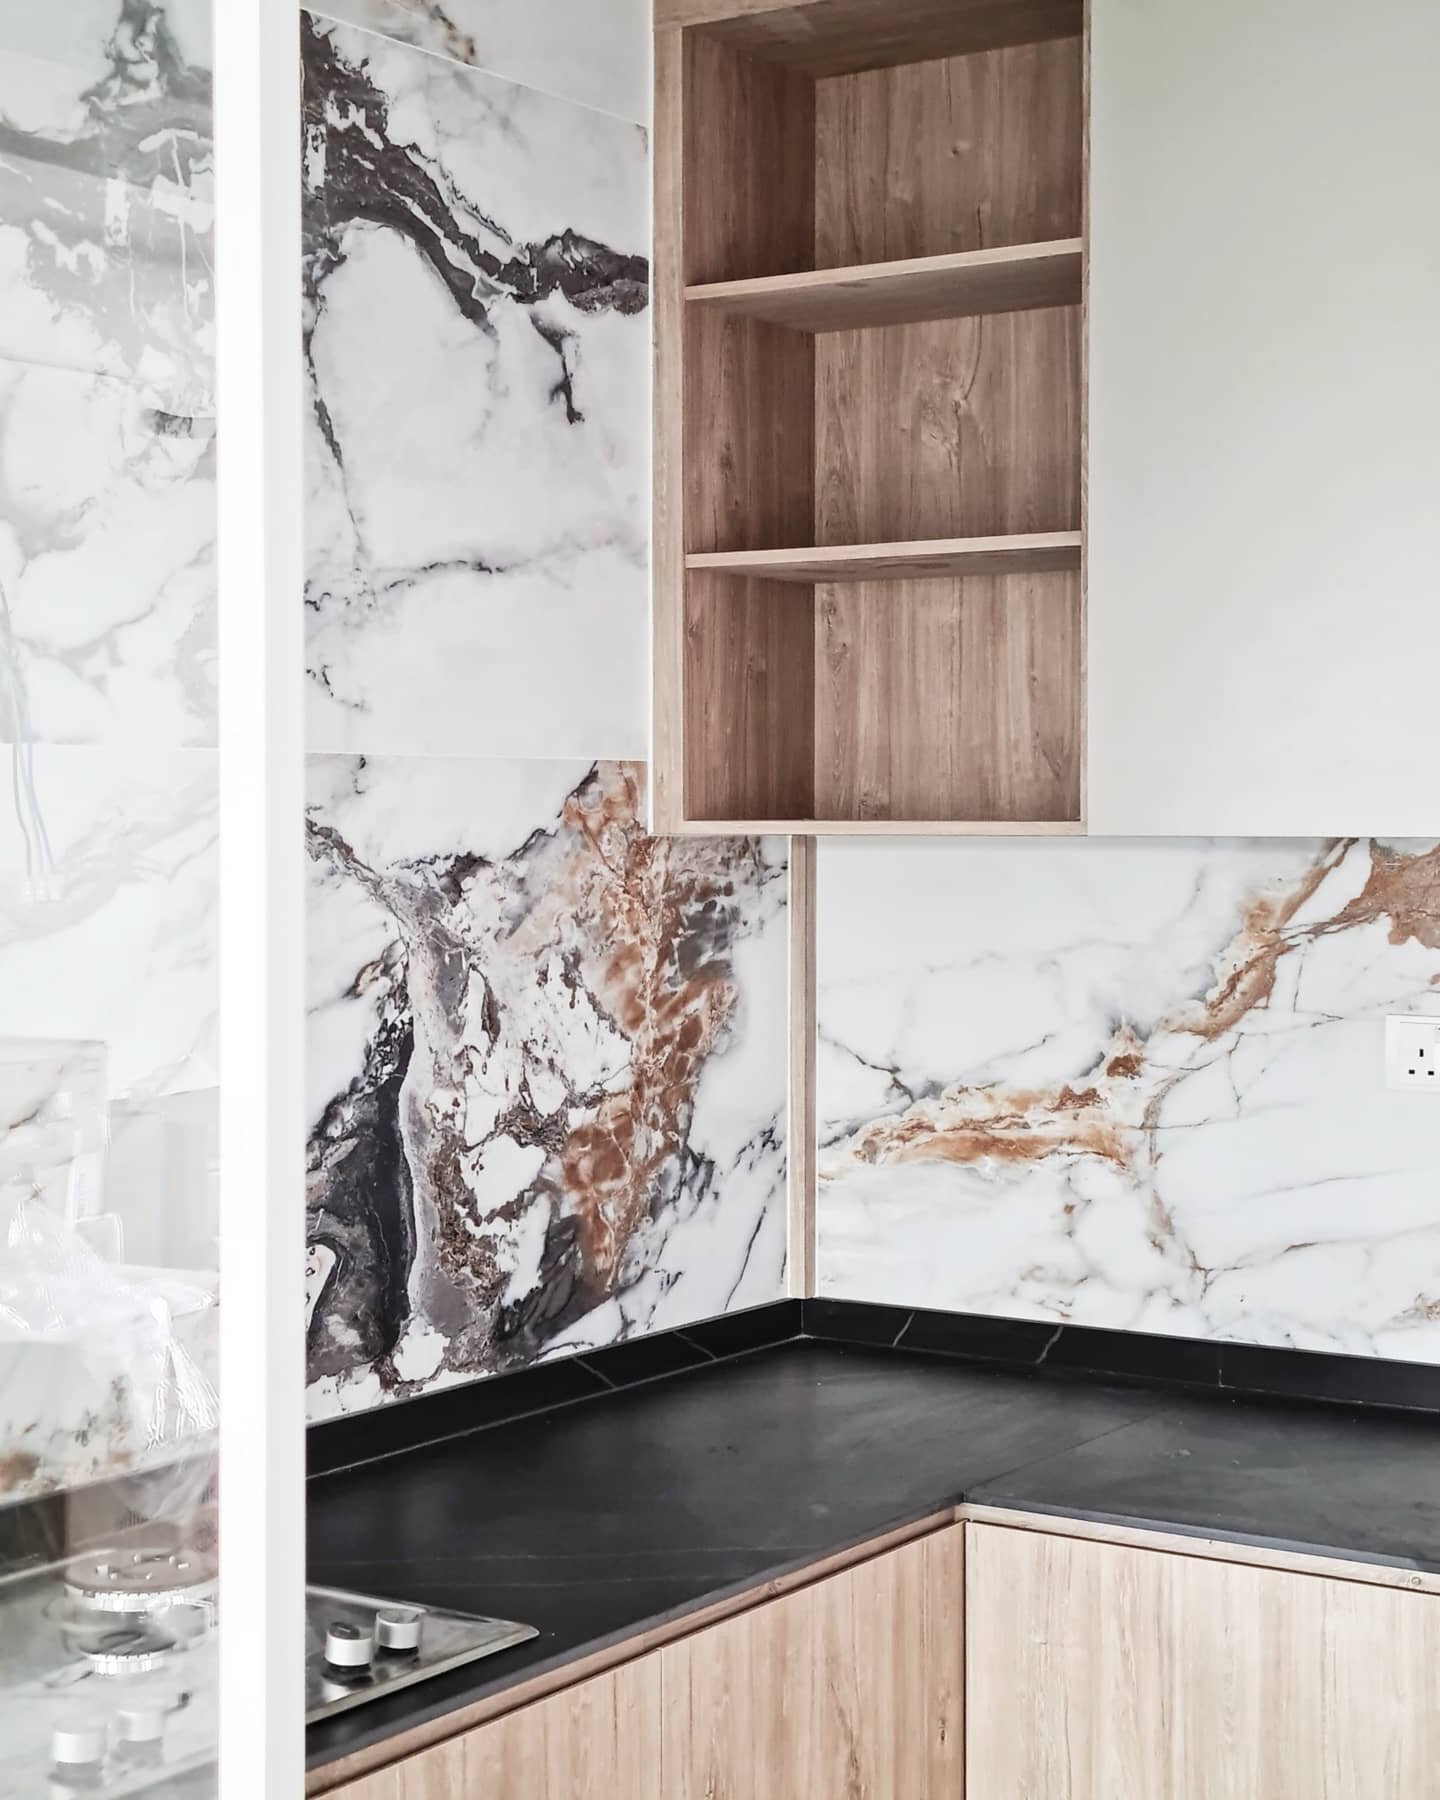 SWIPE ⏩ Our client sure achieved the luxe kitchen of their dreams thanks to these magnificent marble-look porcelain tiles. These tiles are richly veined and give the kitchen a glamourous appeal 🤩

Designer: Caine

#hdbrenovation
#renovationsg
#sghom